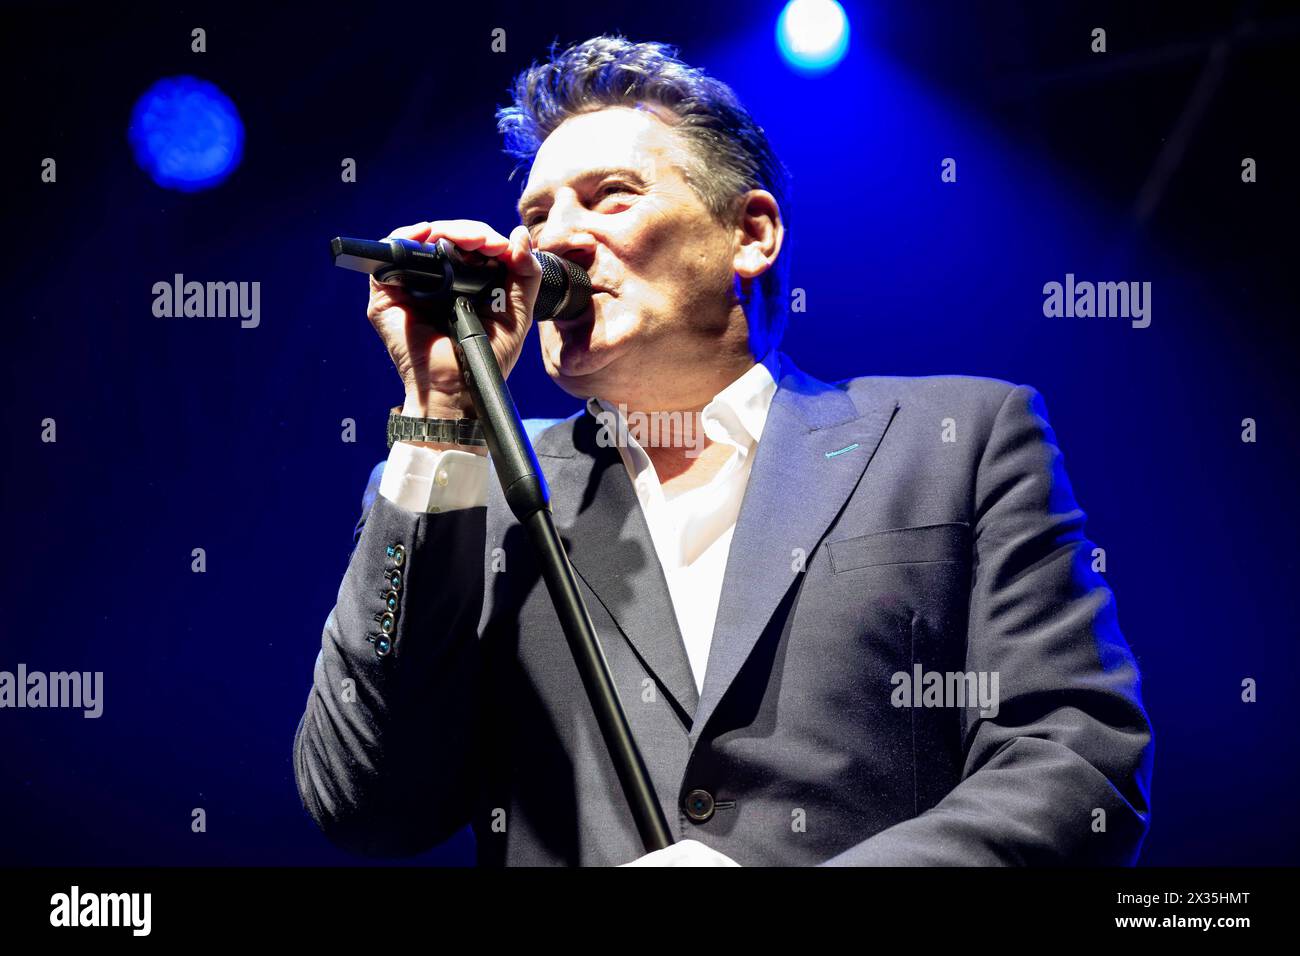 Music Concert - Tony Hadley - Mad About You with The Fabulous TH Band Tony Hadley, stage name of Anthony Patrick Hadley, sing on stage during his live performs for Mad About You with The Fabulous TH Band European Tour at PalaUnical Theatre on April 24, 2024 in Mantua, Italy. Mantua PalaUnical Theatre Italy Copyright: xRobertoxTommasinix/xLiveMediax LPM 1327381 Stock Photo